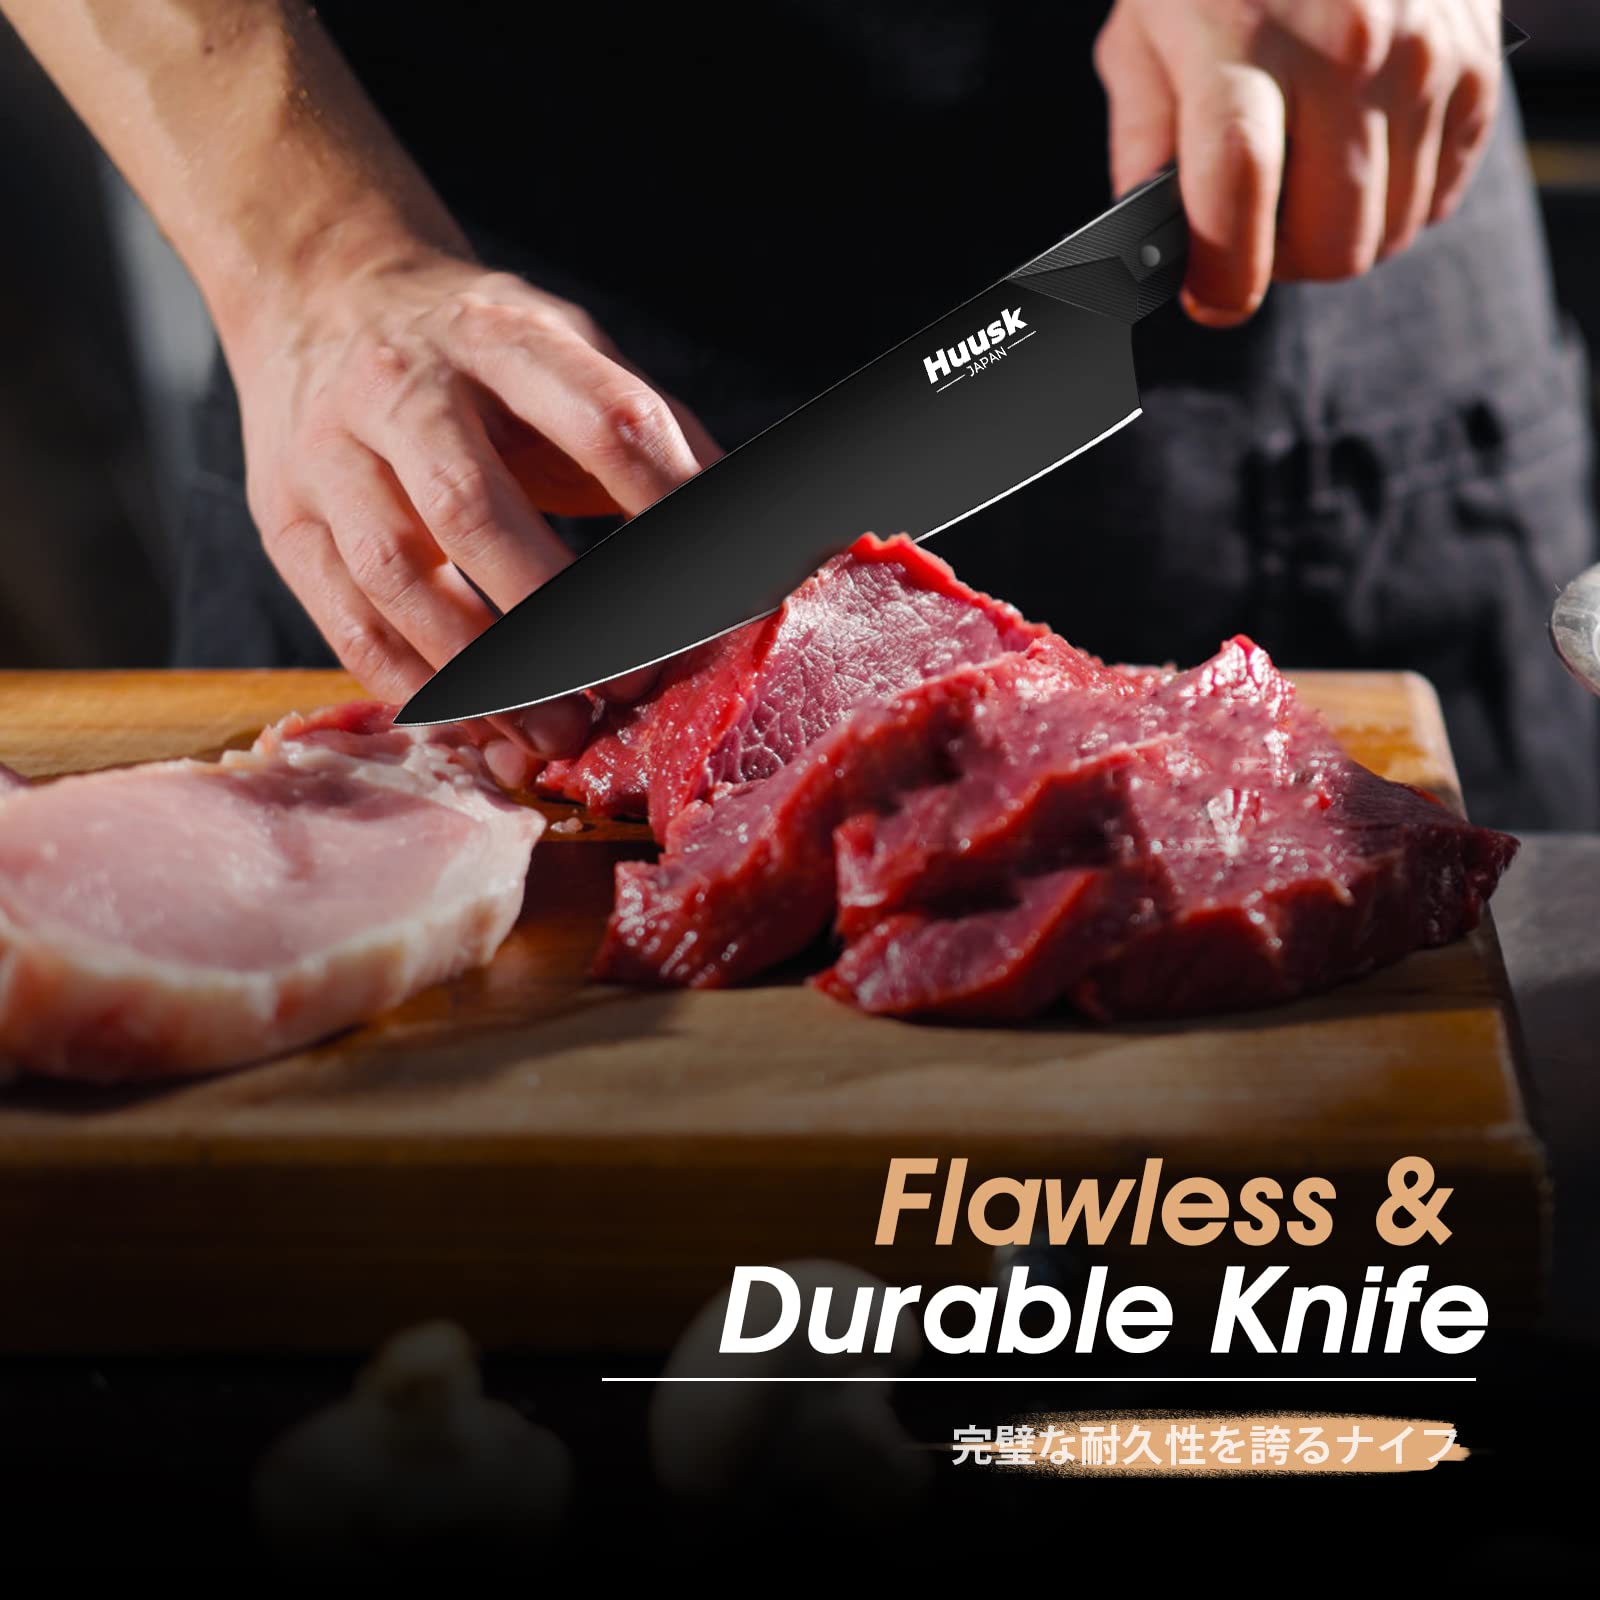 Huusk Japan Knives, Upgraded Serbian Chef Knife Bundle with Professional Kitchen Knives